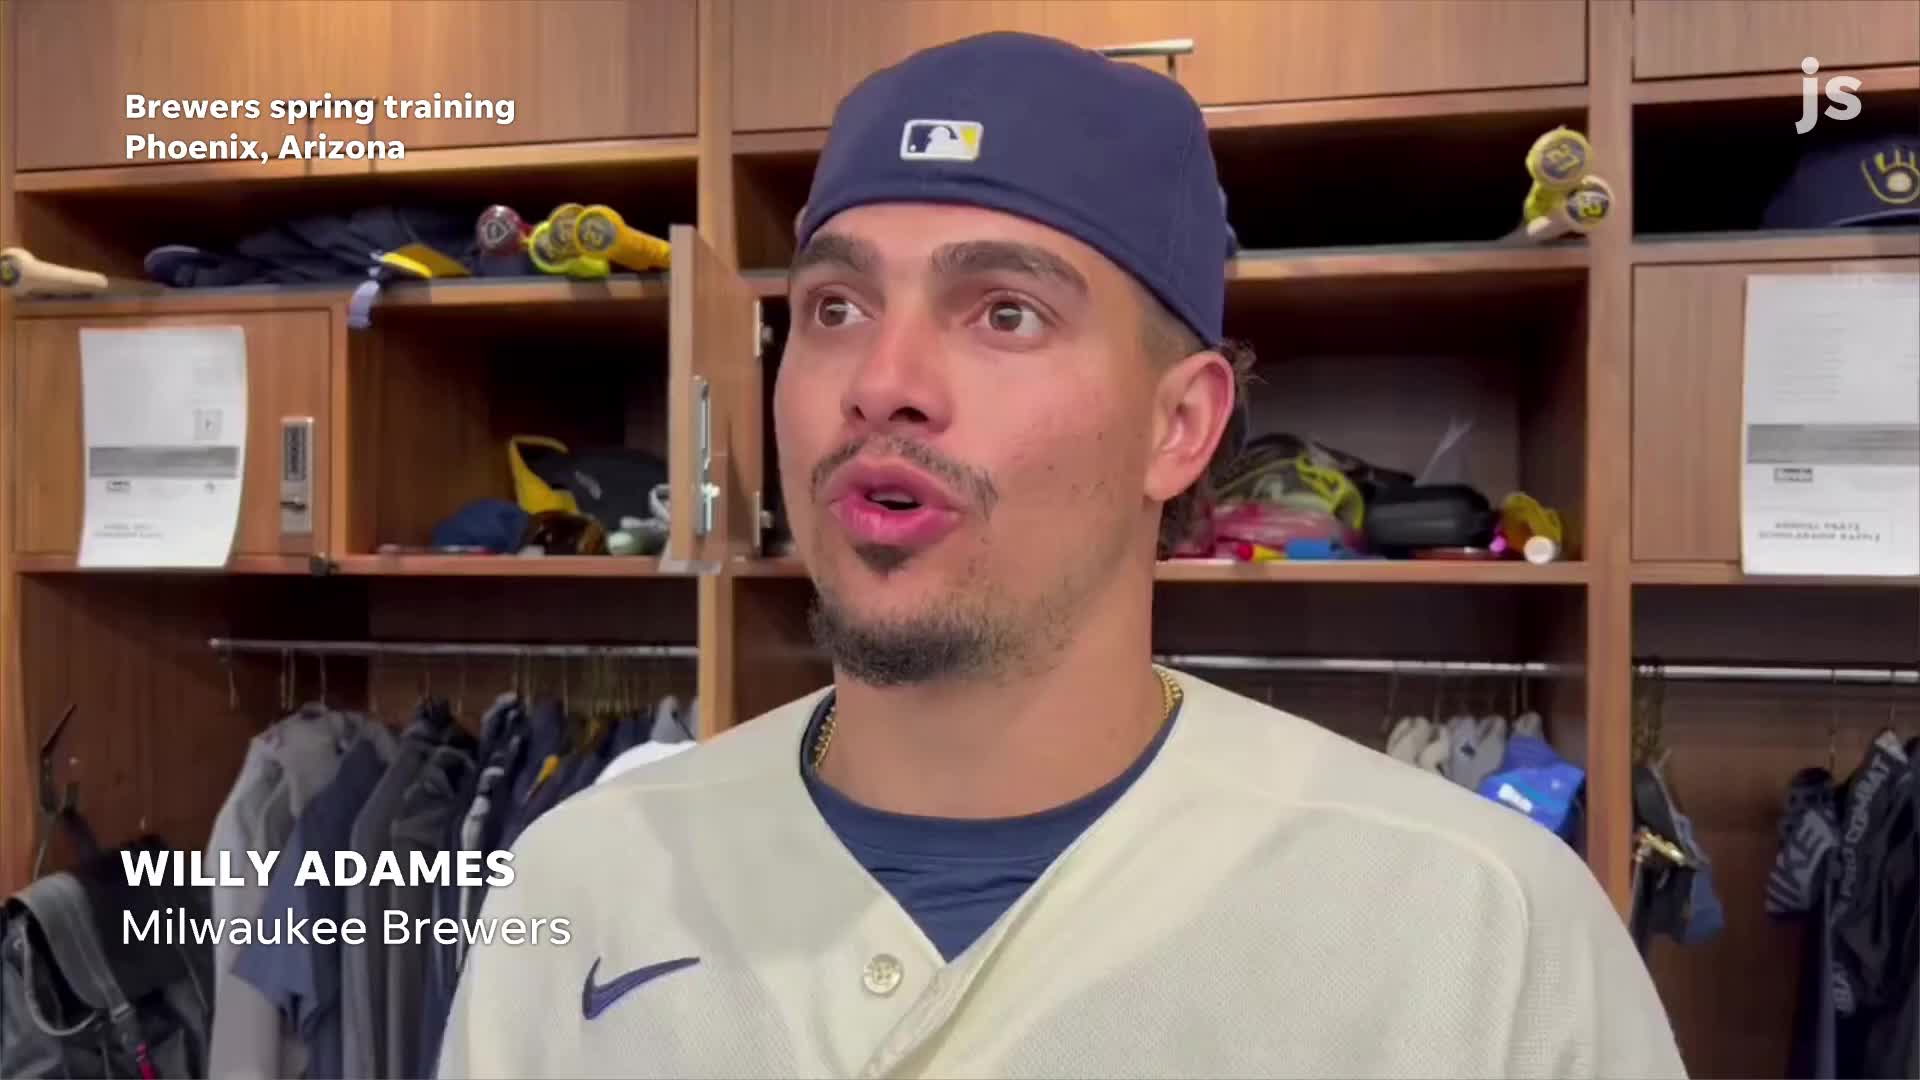 Willy Adames makes his prediction for the World Baseball Classic